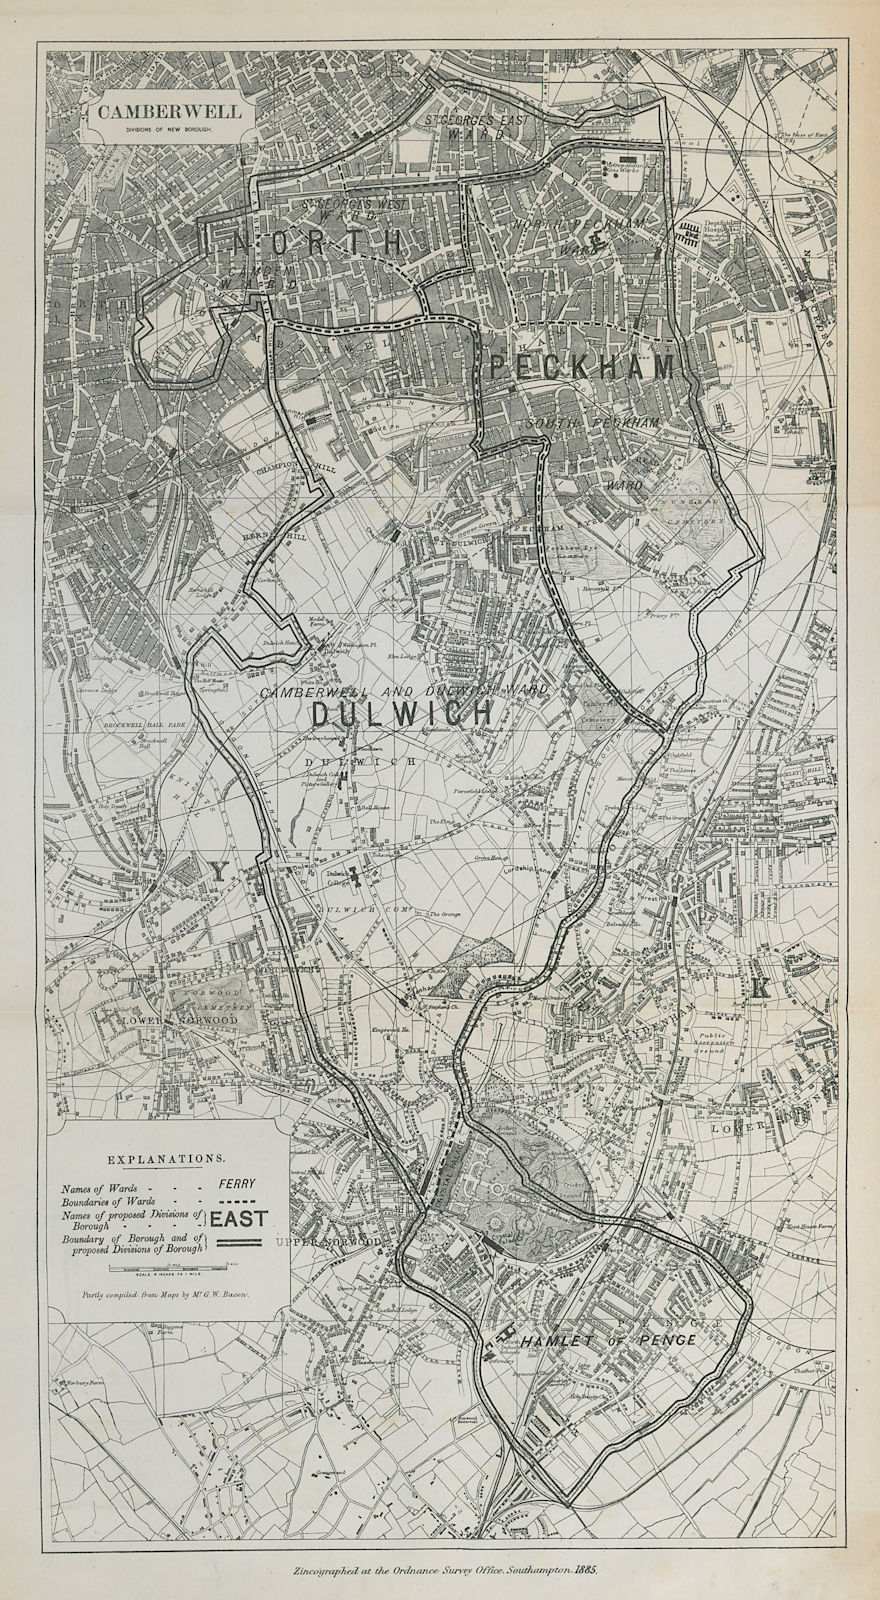 Camberwell Parliamentary Borough. Dulwich Penge. BOUNDARY COMMISSION 1885 map